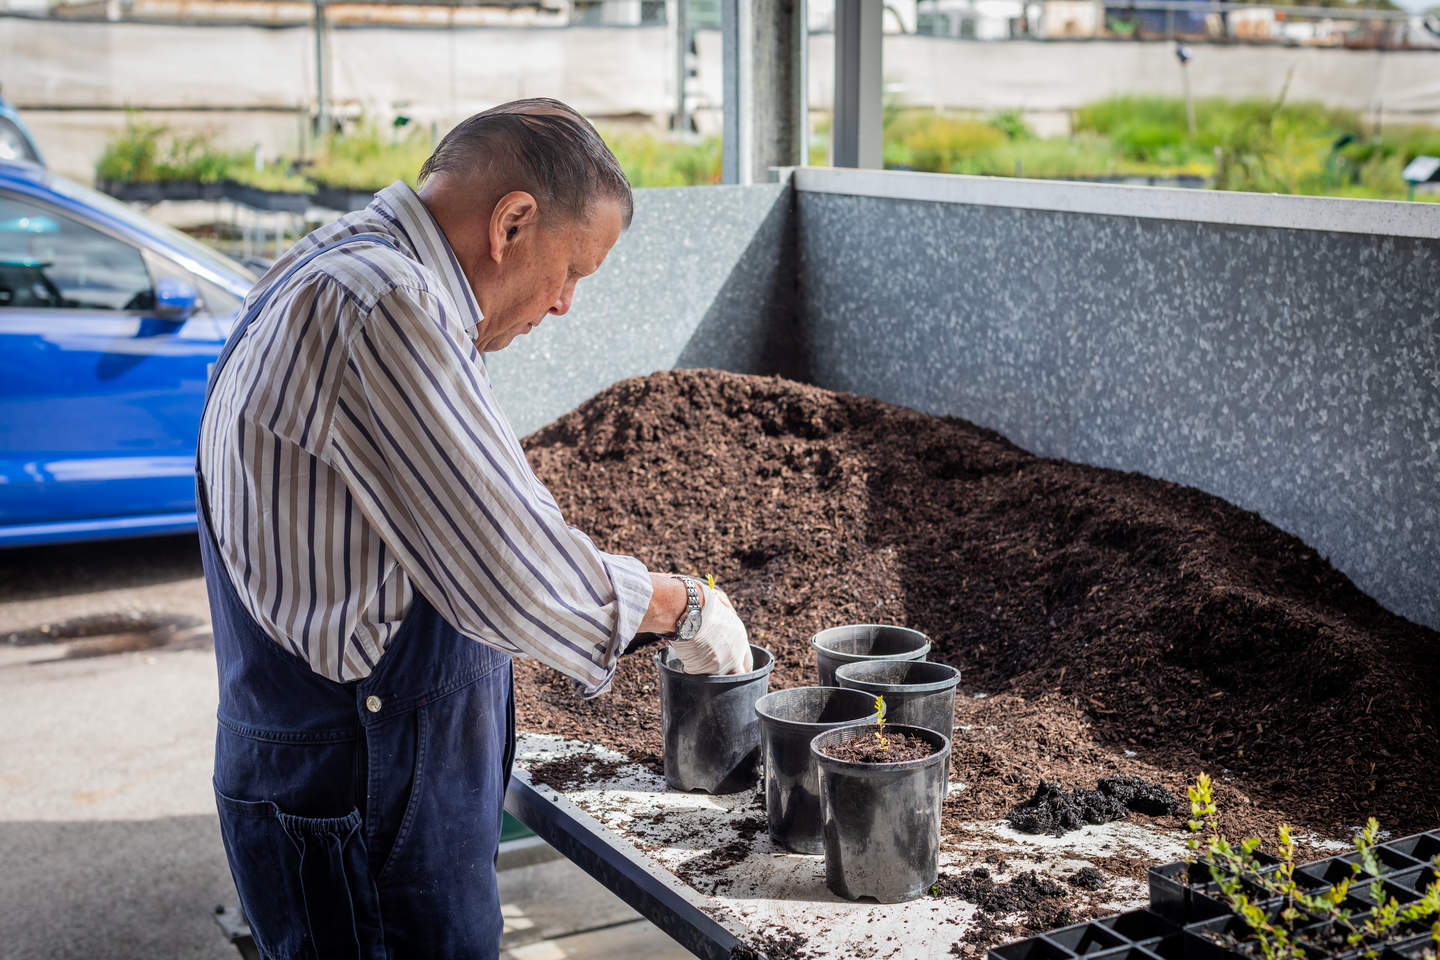 Person filling small black buckets with soil